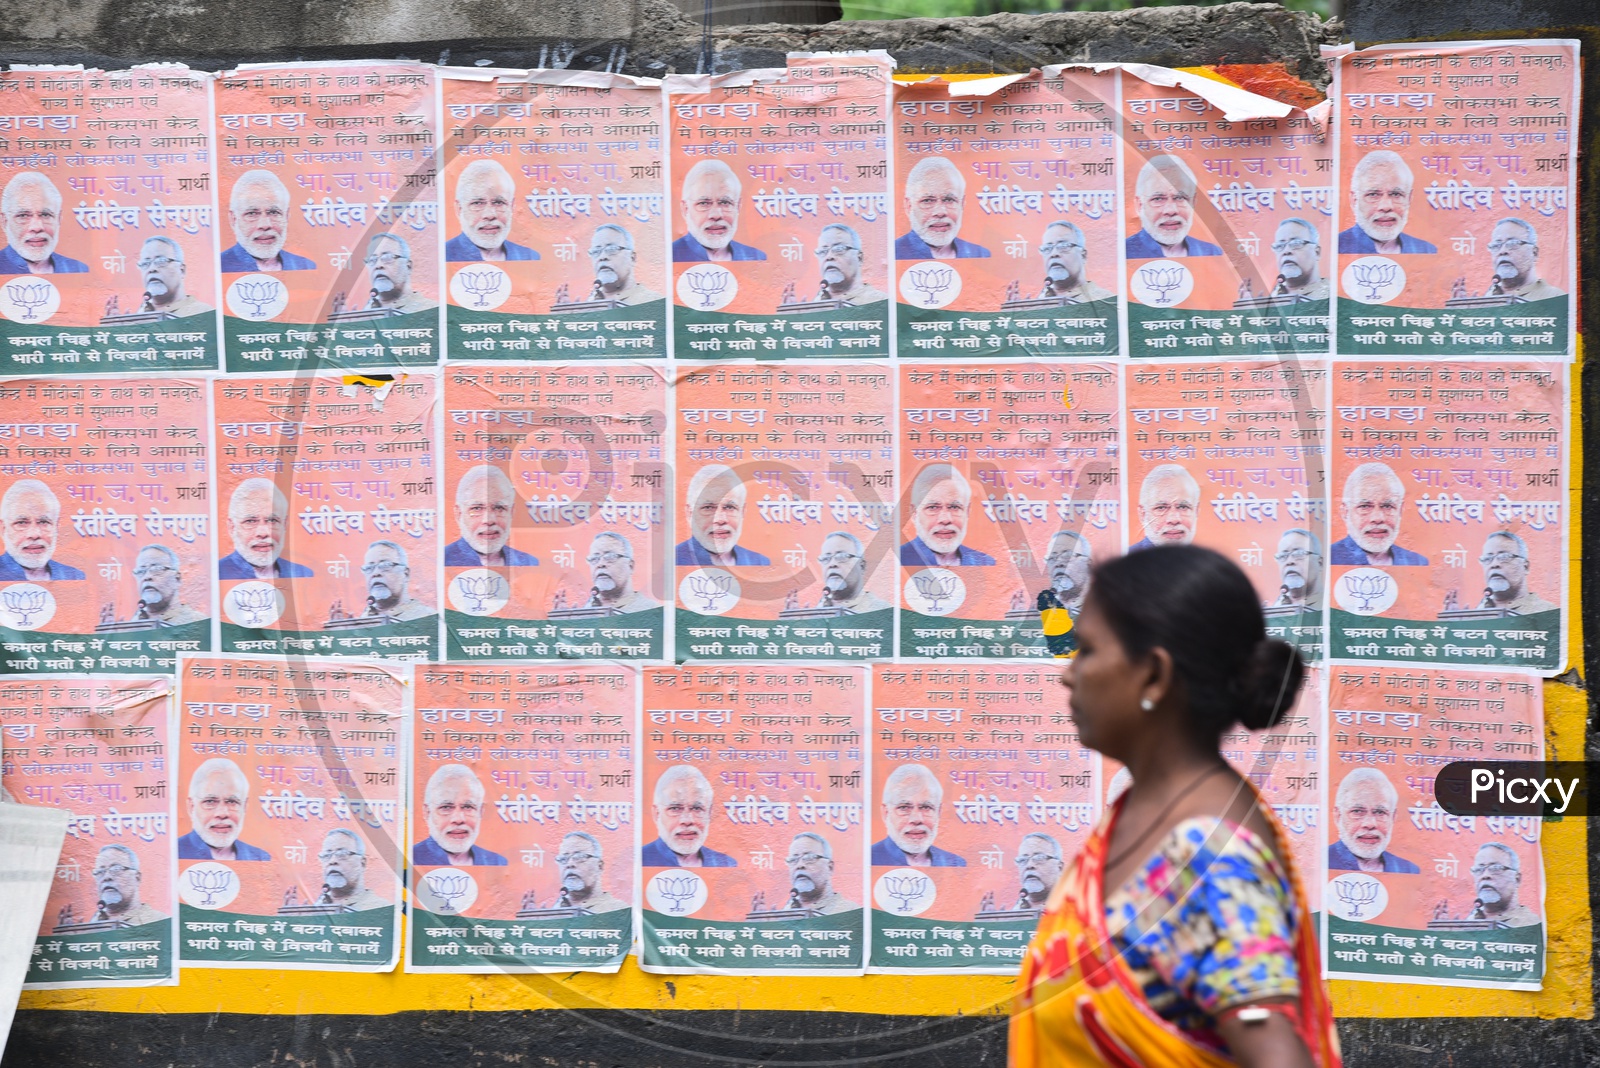 BJP Or Narendra Modi Posters On Street Walls  in Kolkata City As a Part Of Election Campaign